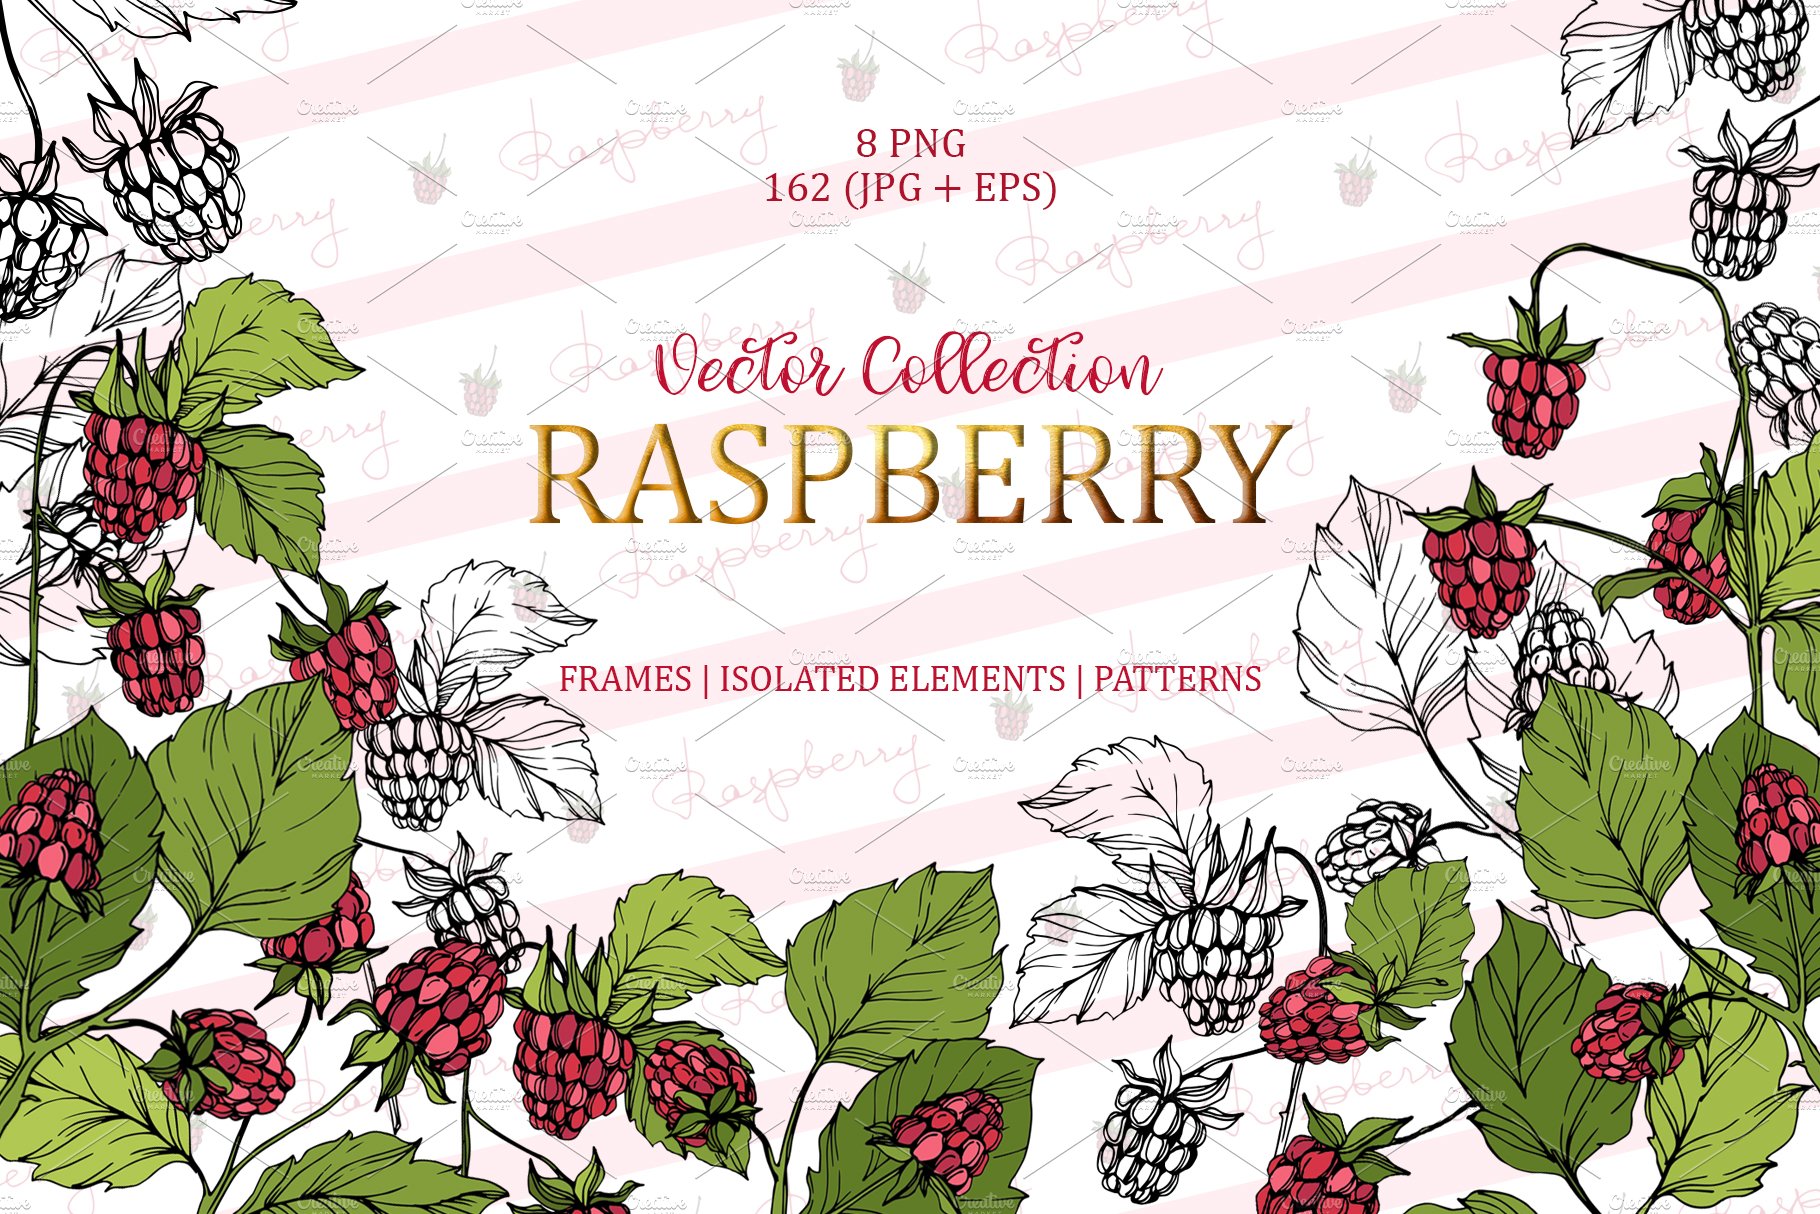 Raspberry Vector Collection cover image.